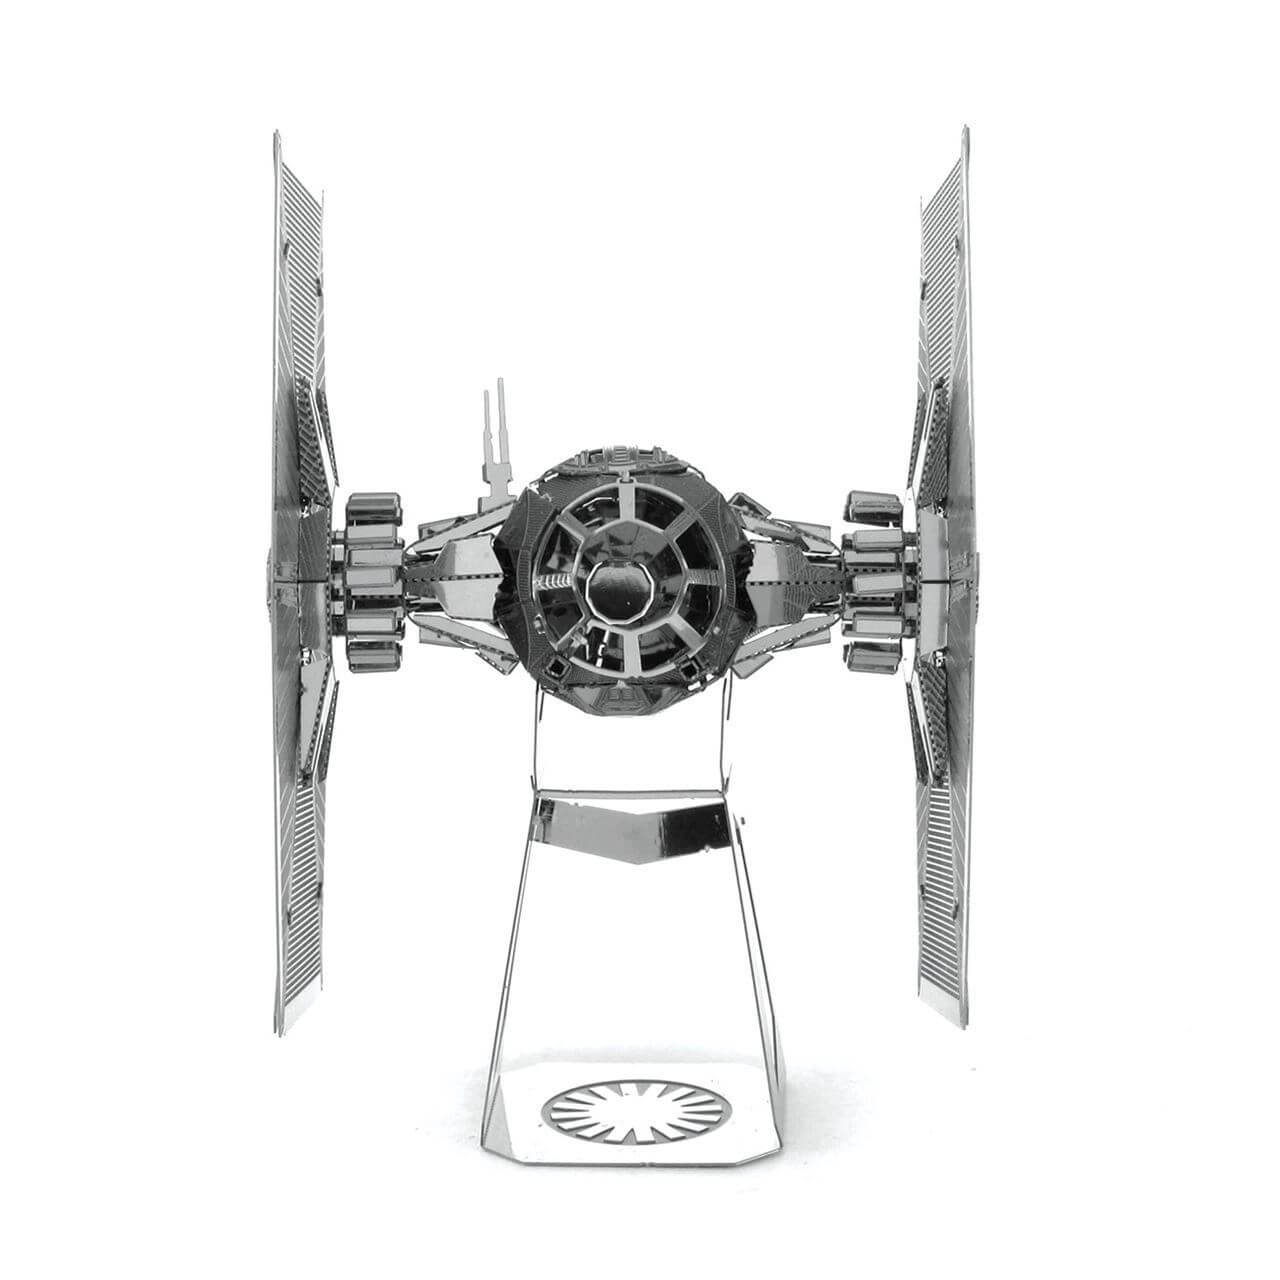 Metal Earth Star Wars Special Forces TIE Fighter Metal Kit - 2 Sheets